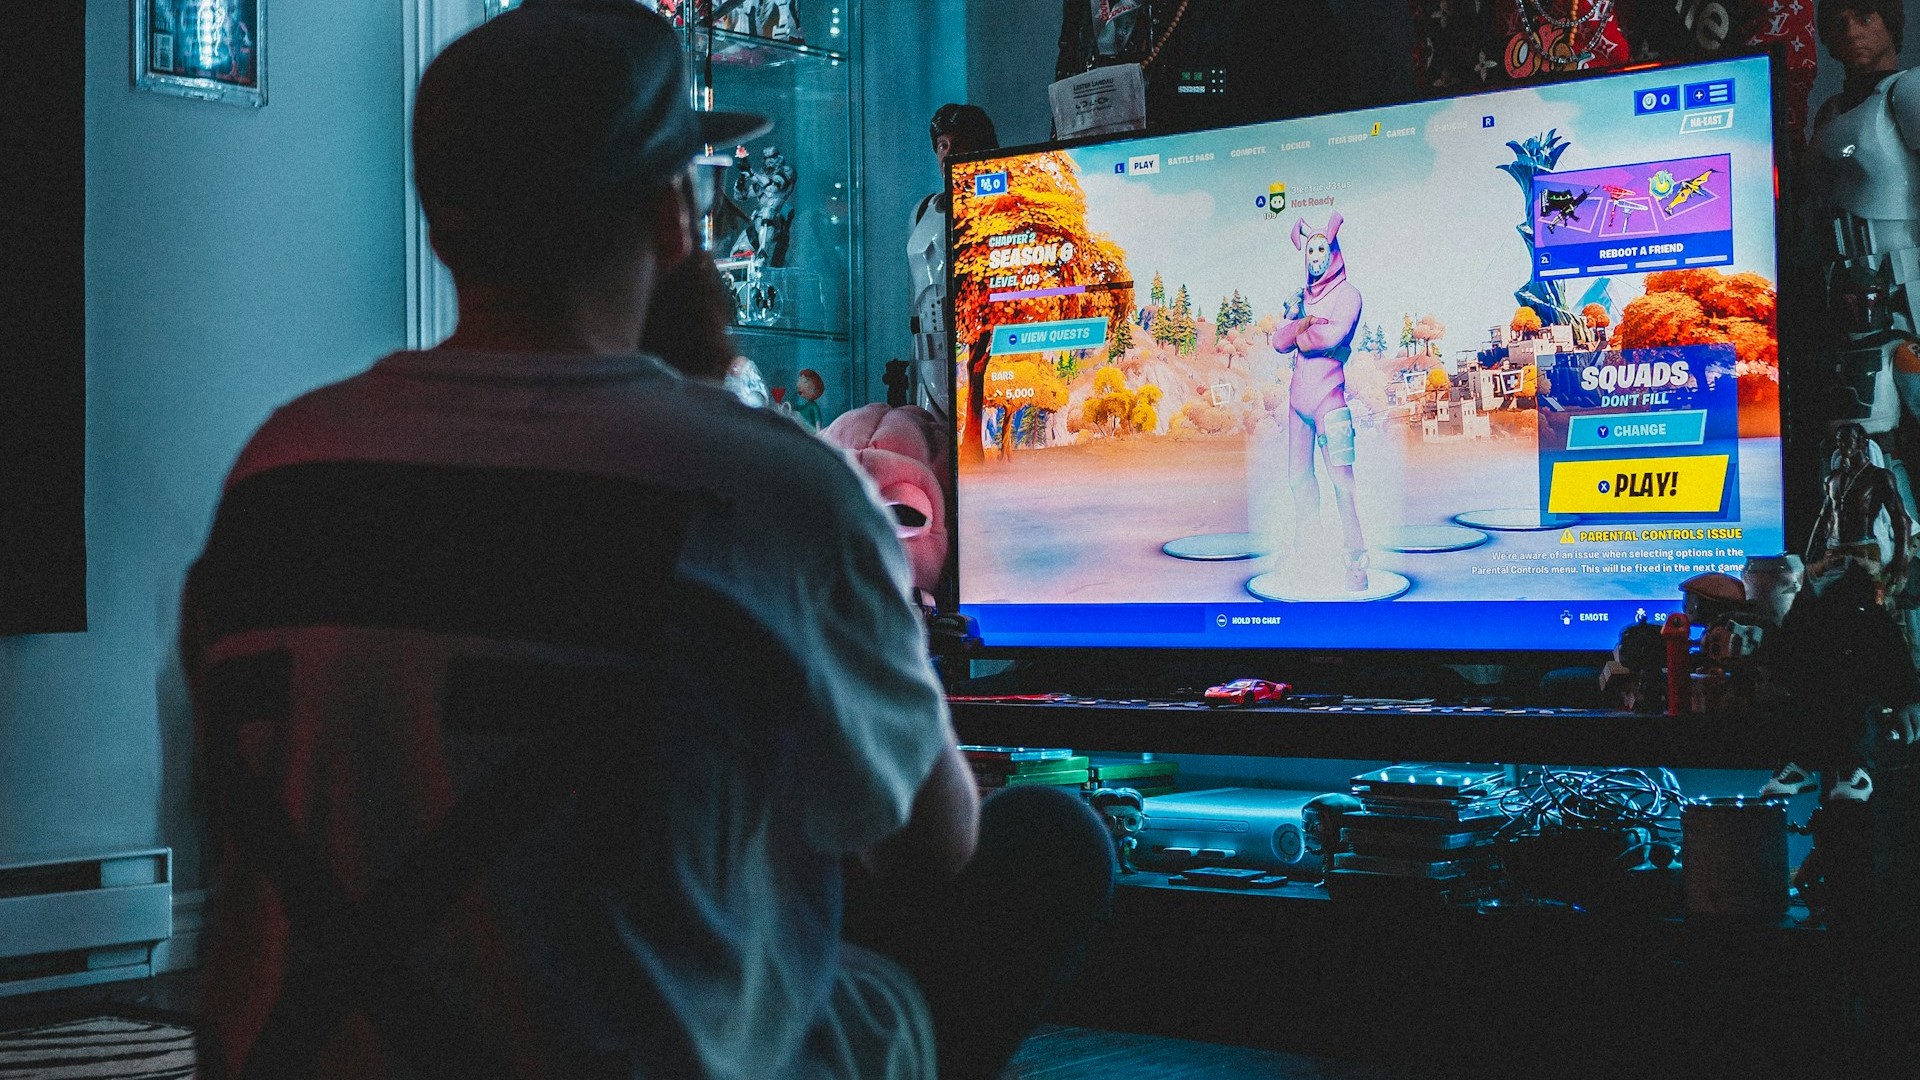 Science shows the impact of video games on mental health